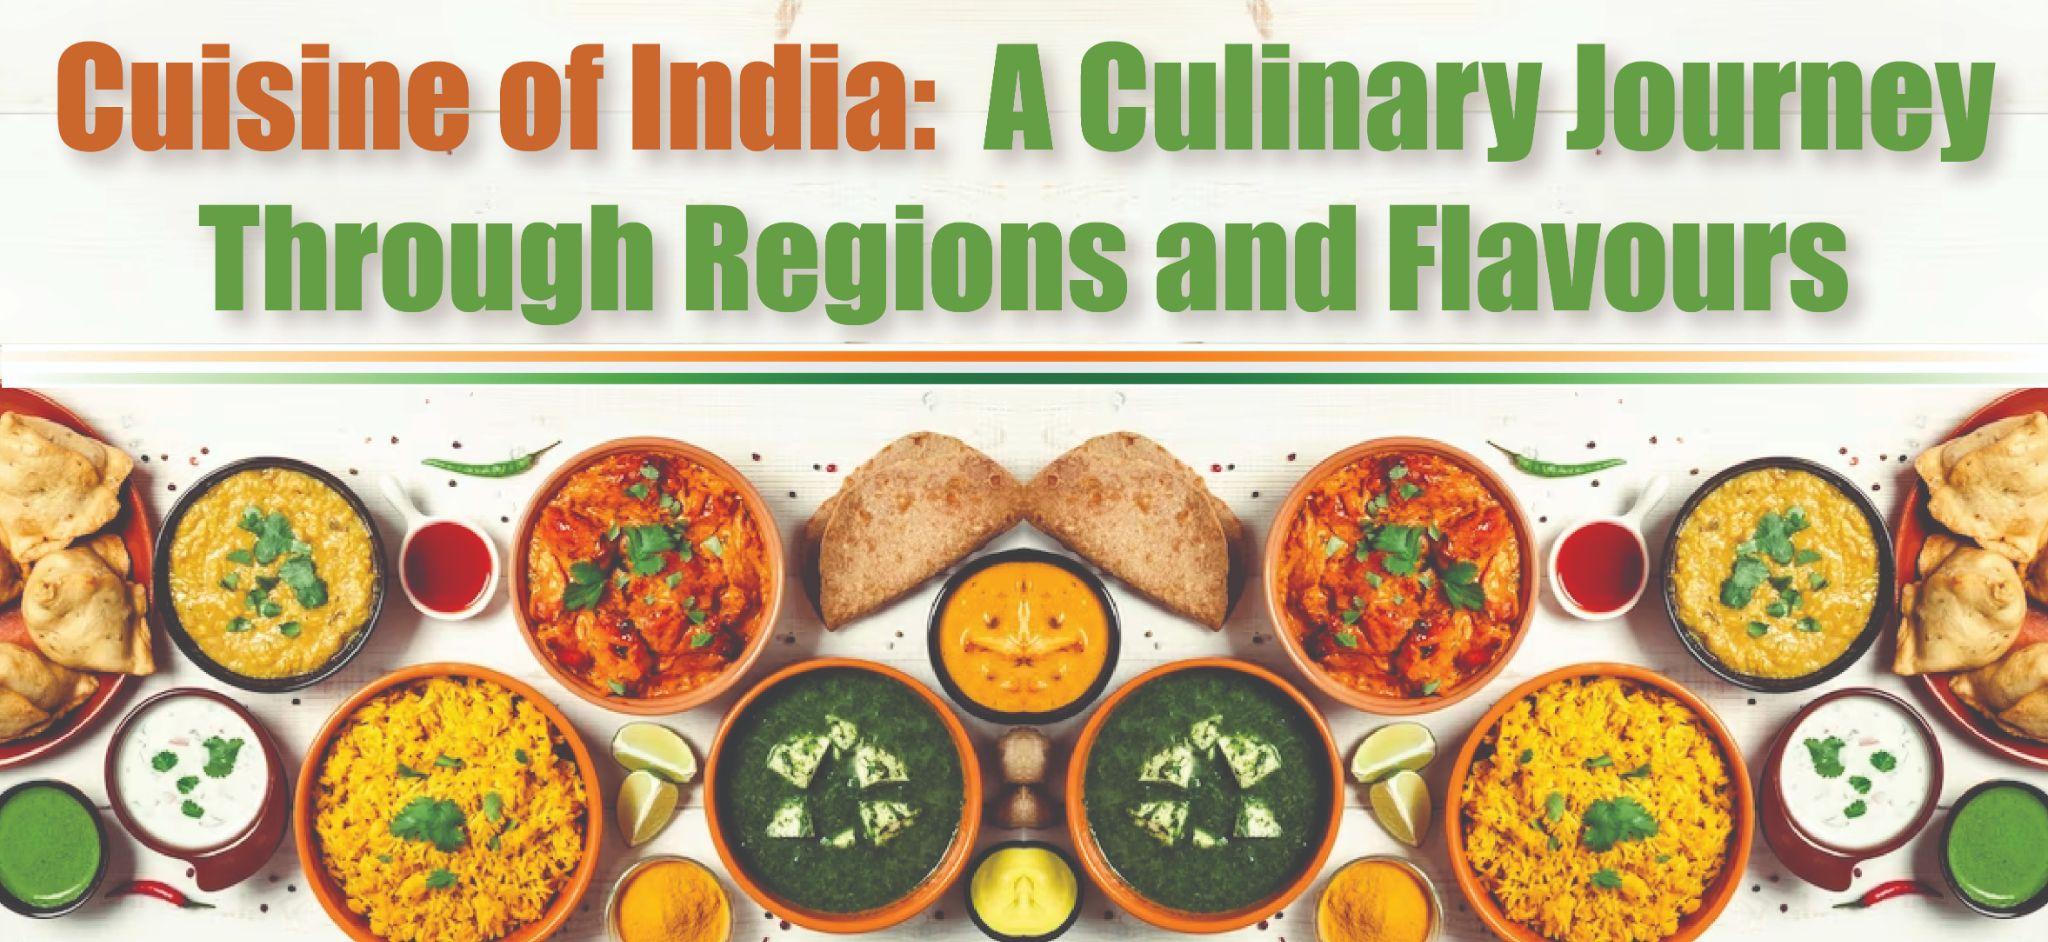 Cuisine of India: A Culinary Journey Through Regions and Flavours